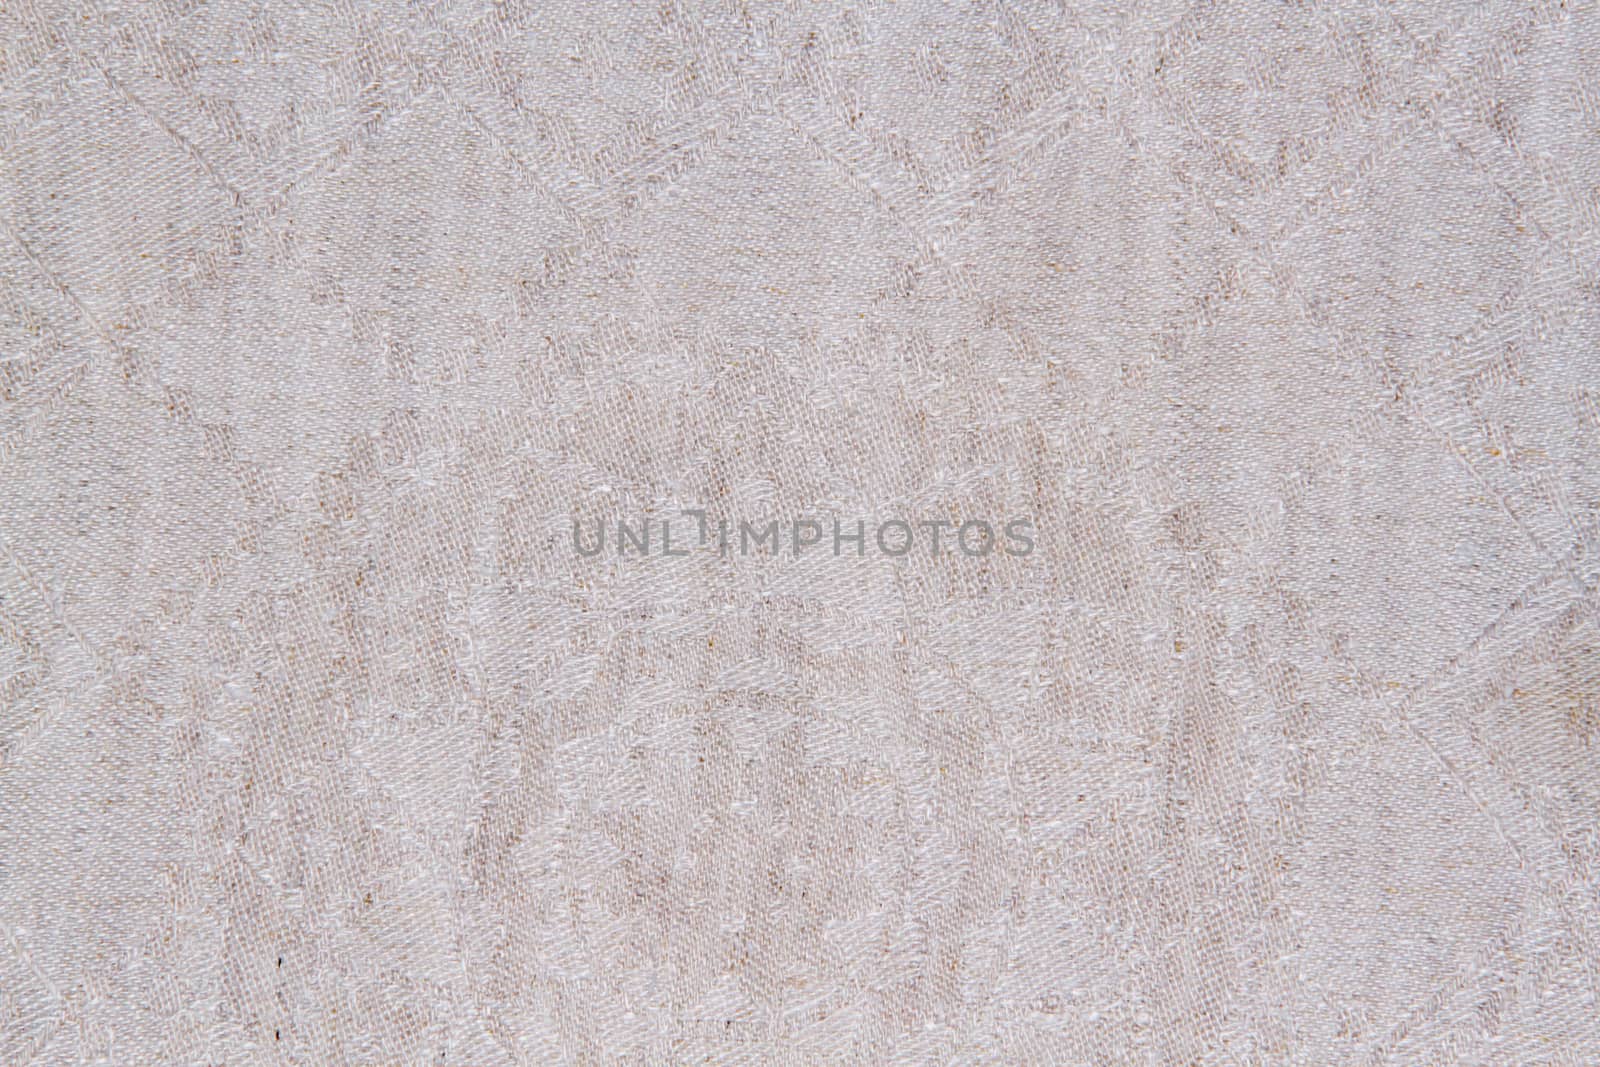 Natural vintage linen burlap textured fabric texture, detailed old grunge rustic background in tan, beige, yellowish canvas copy space